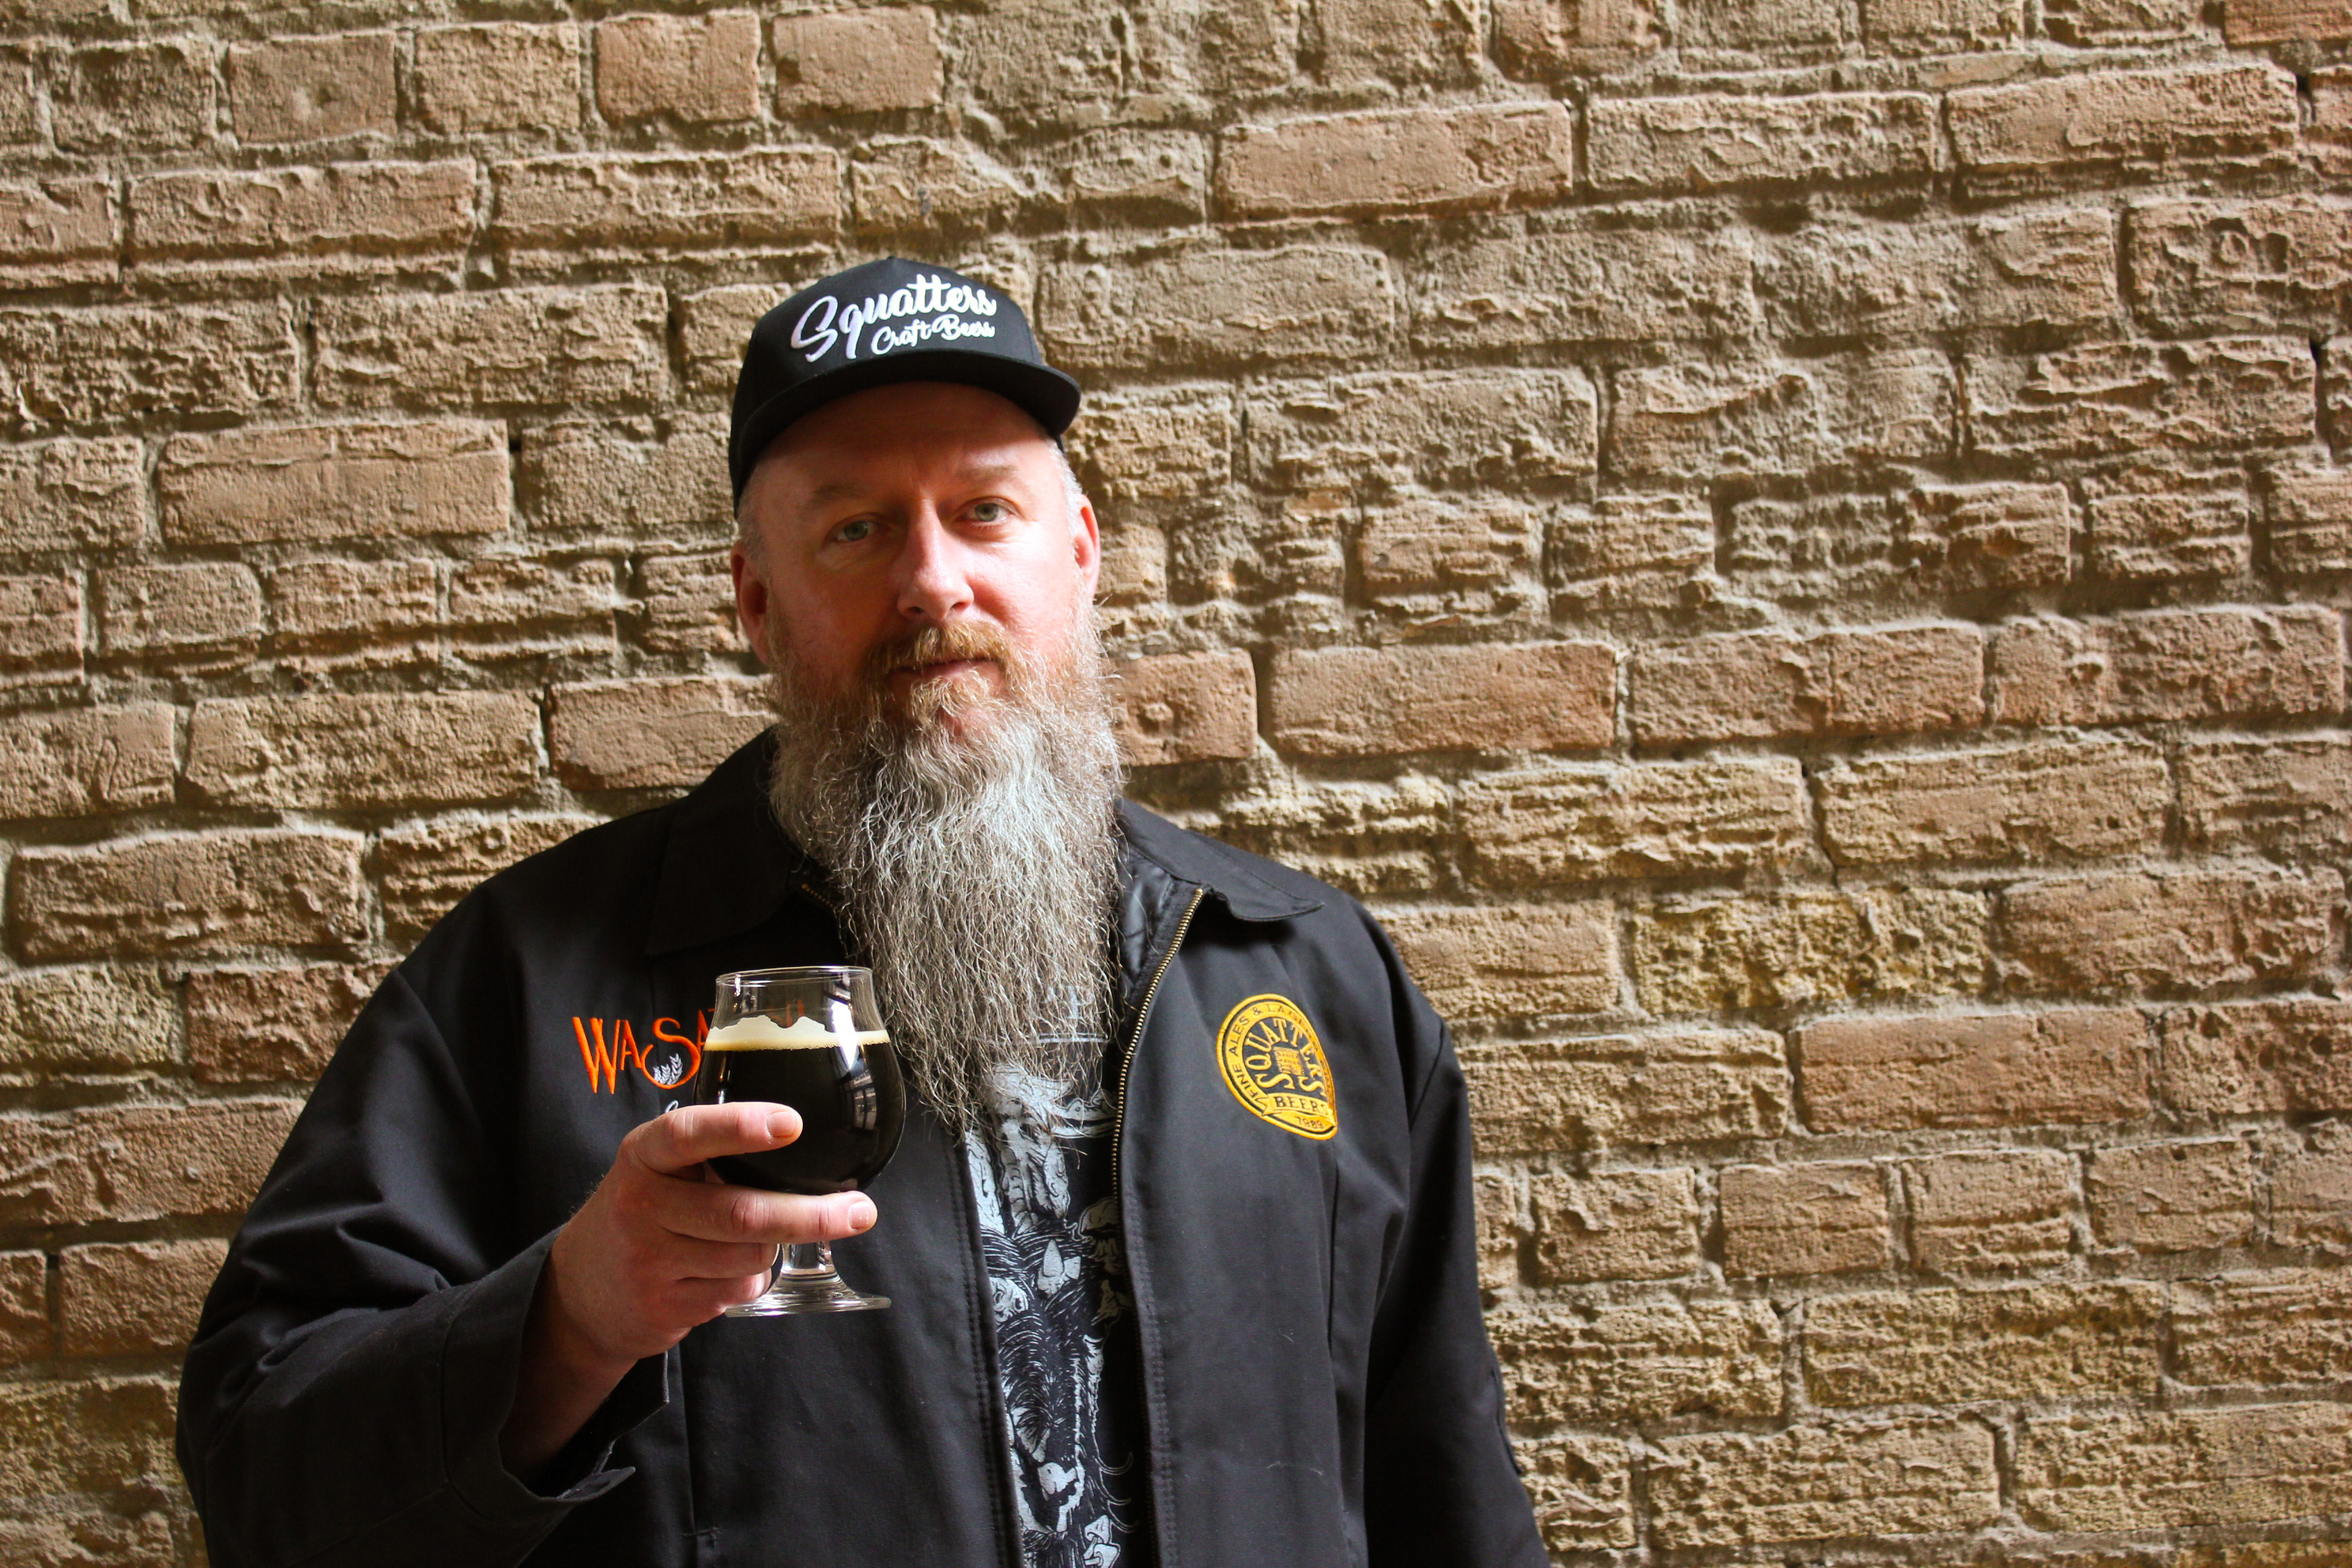 Jason Stock's preferred beer style is a good ol' Stout. Photo by Chris Hollands